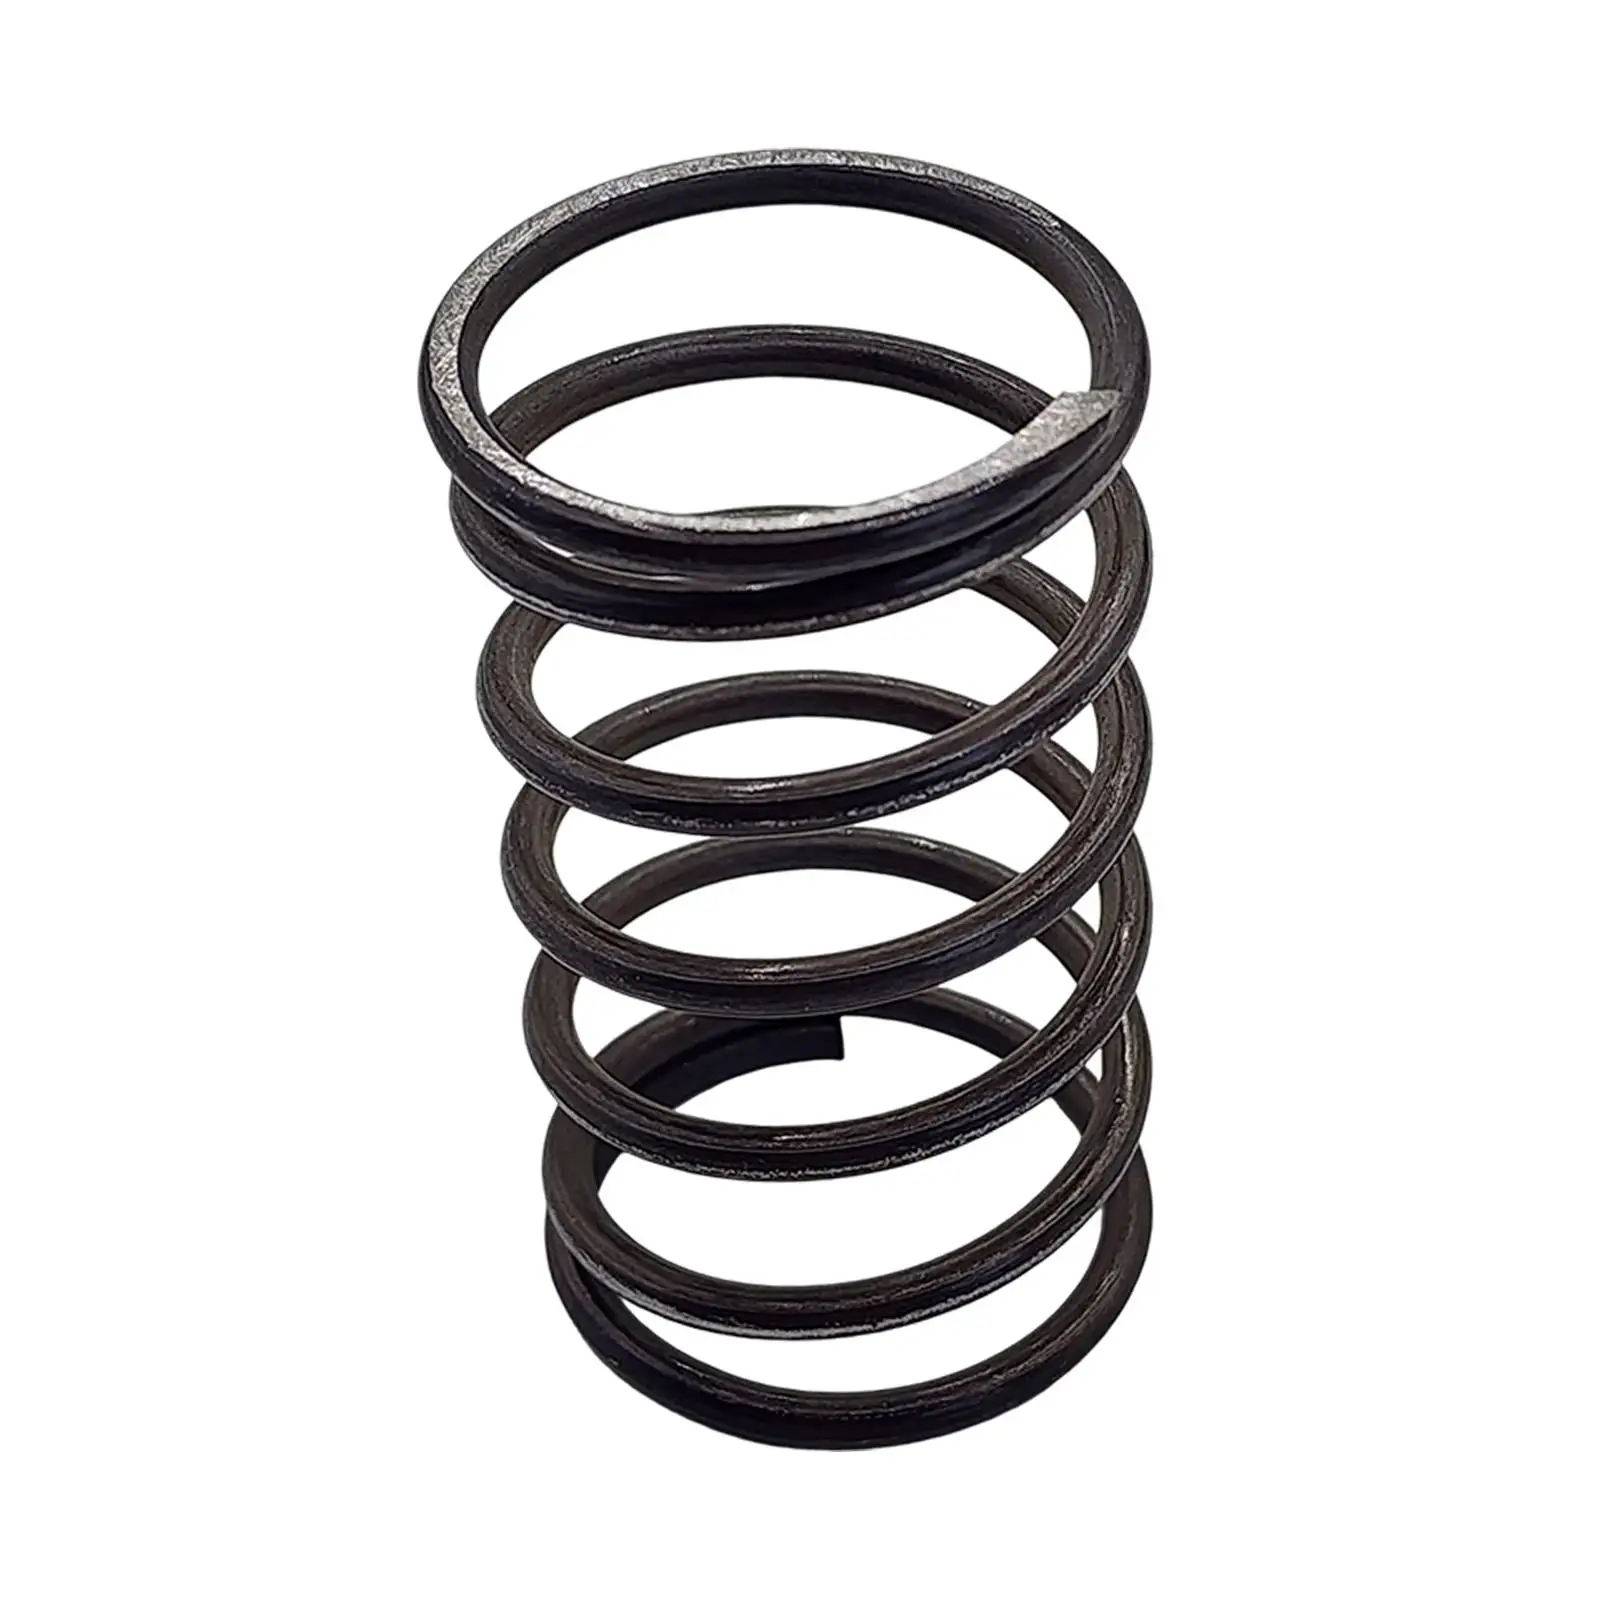 

Clutch Spring Assist 35 lb in Replaces Easy to Install Portable Durable for Mustang GT Shelby GT350 Ecoboost 2015-2020